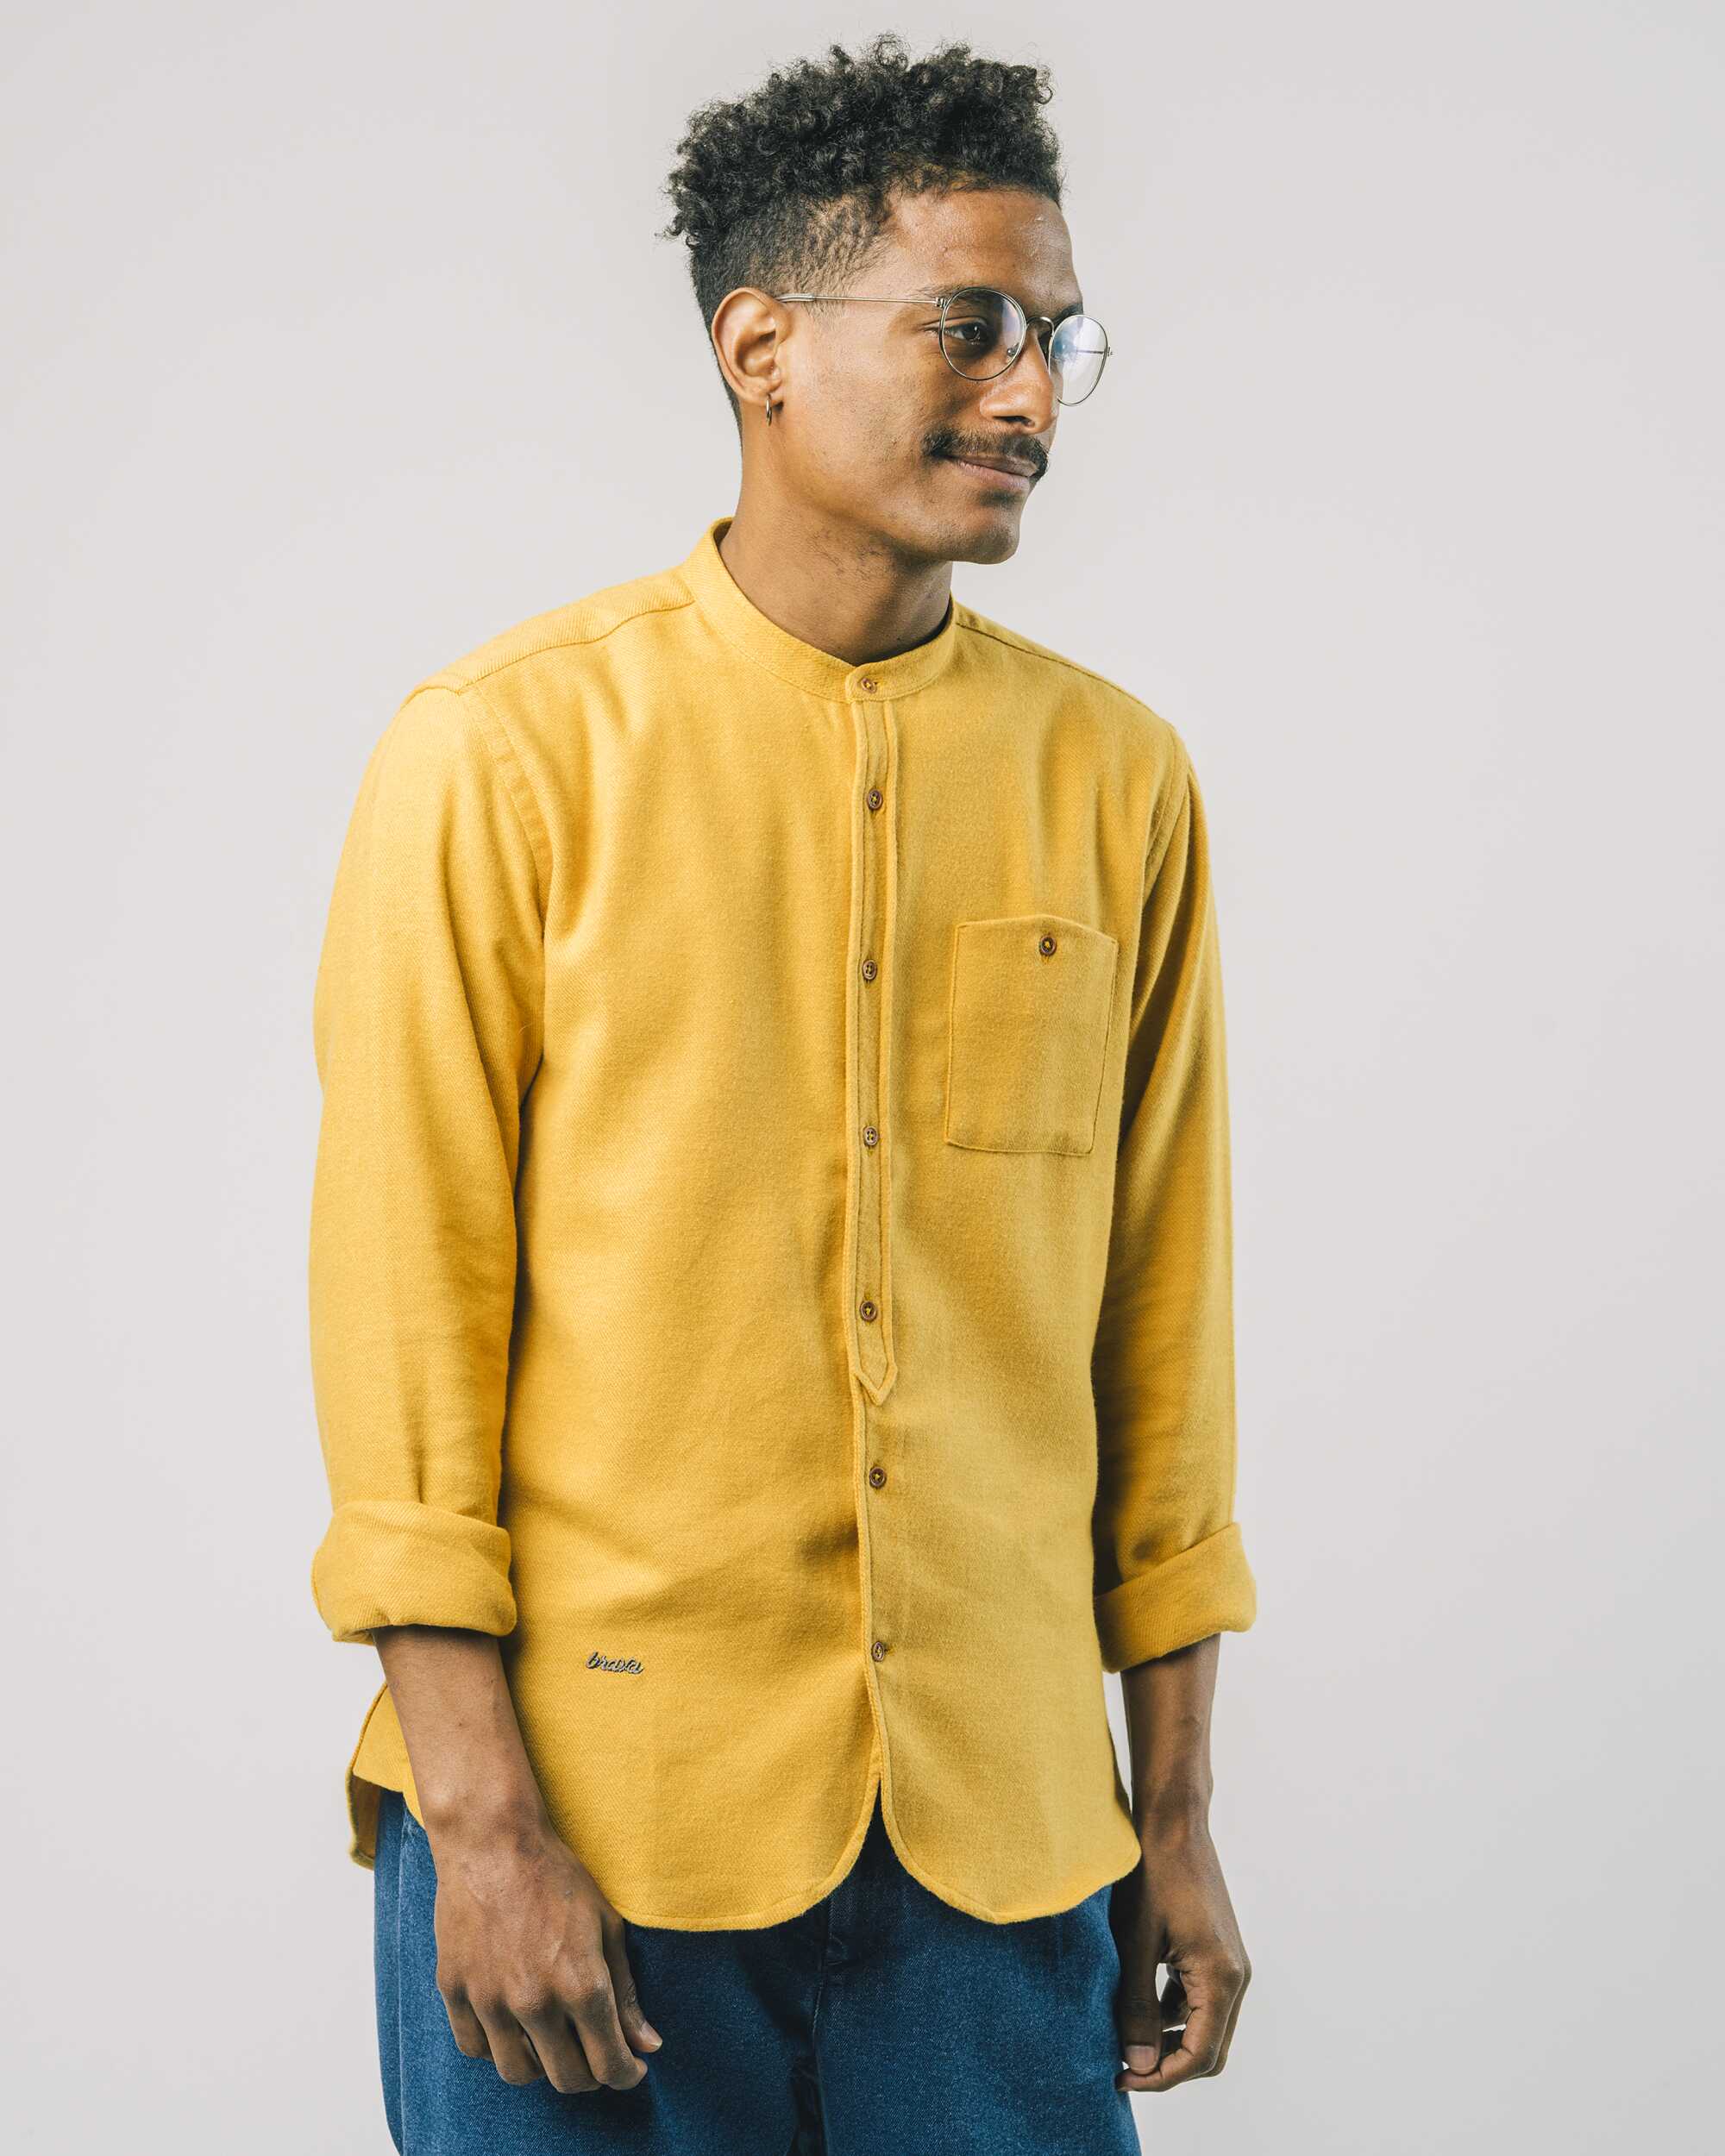 Flannel shirt in mustard - yellow made from 100% organic cotton from Brava Fabrics